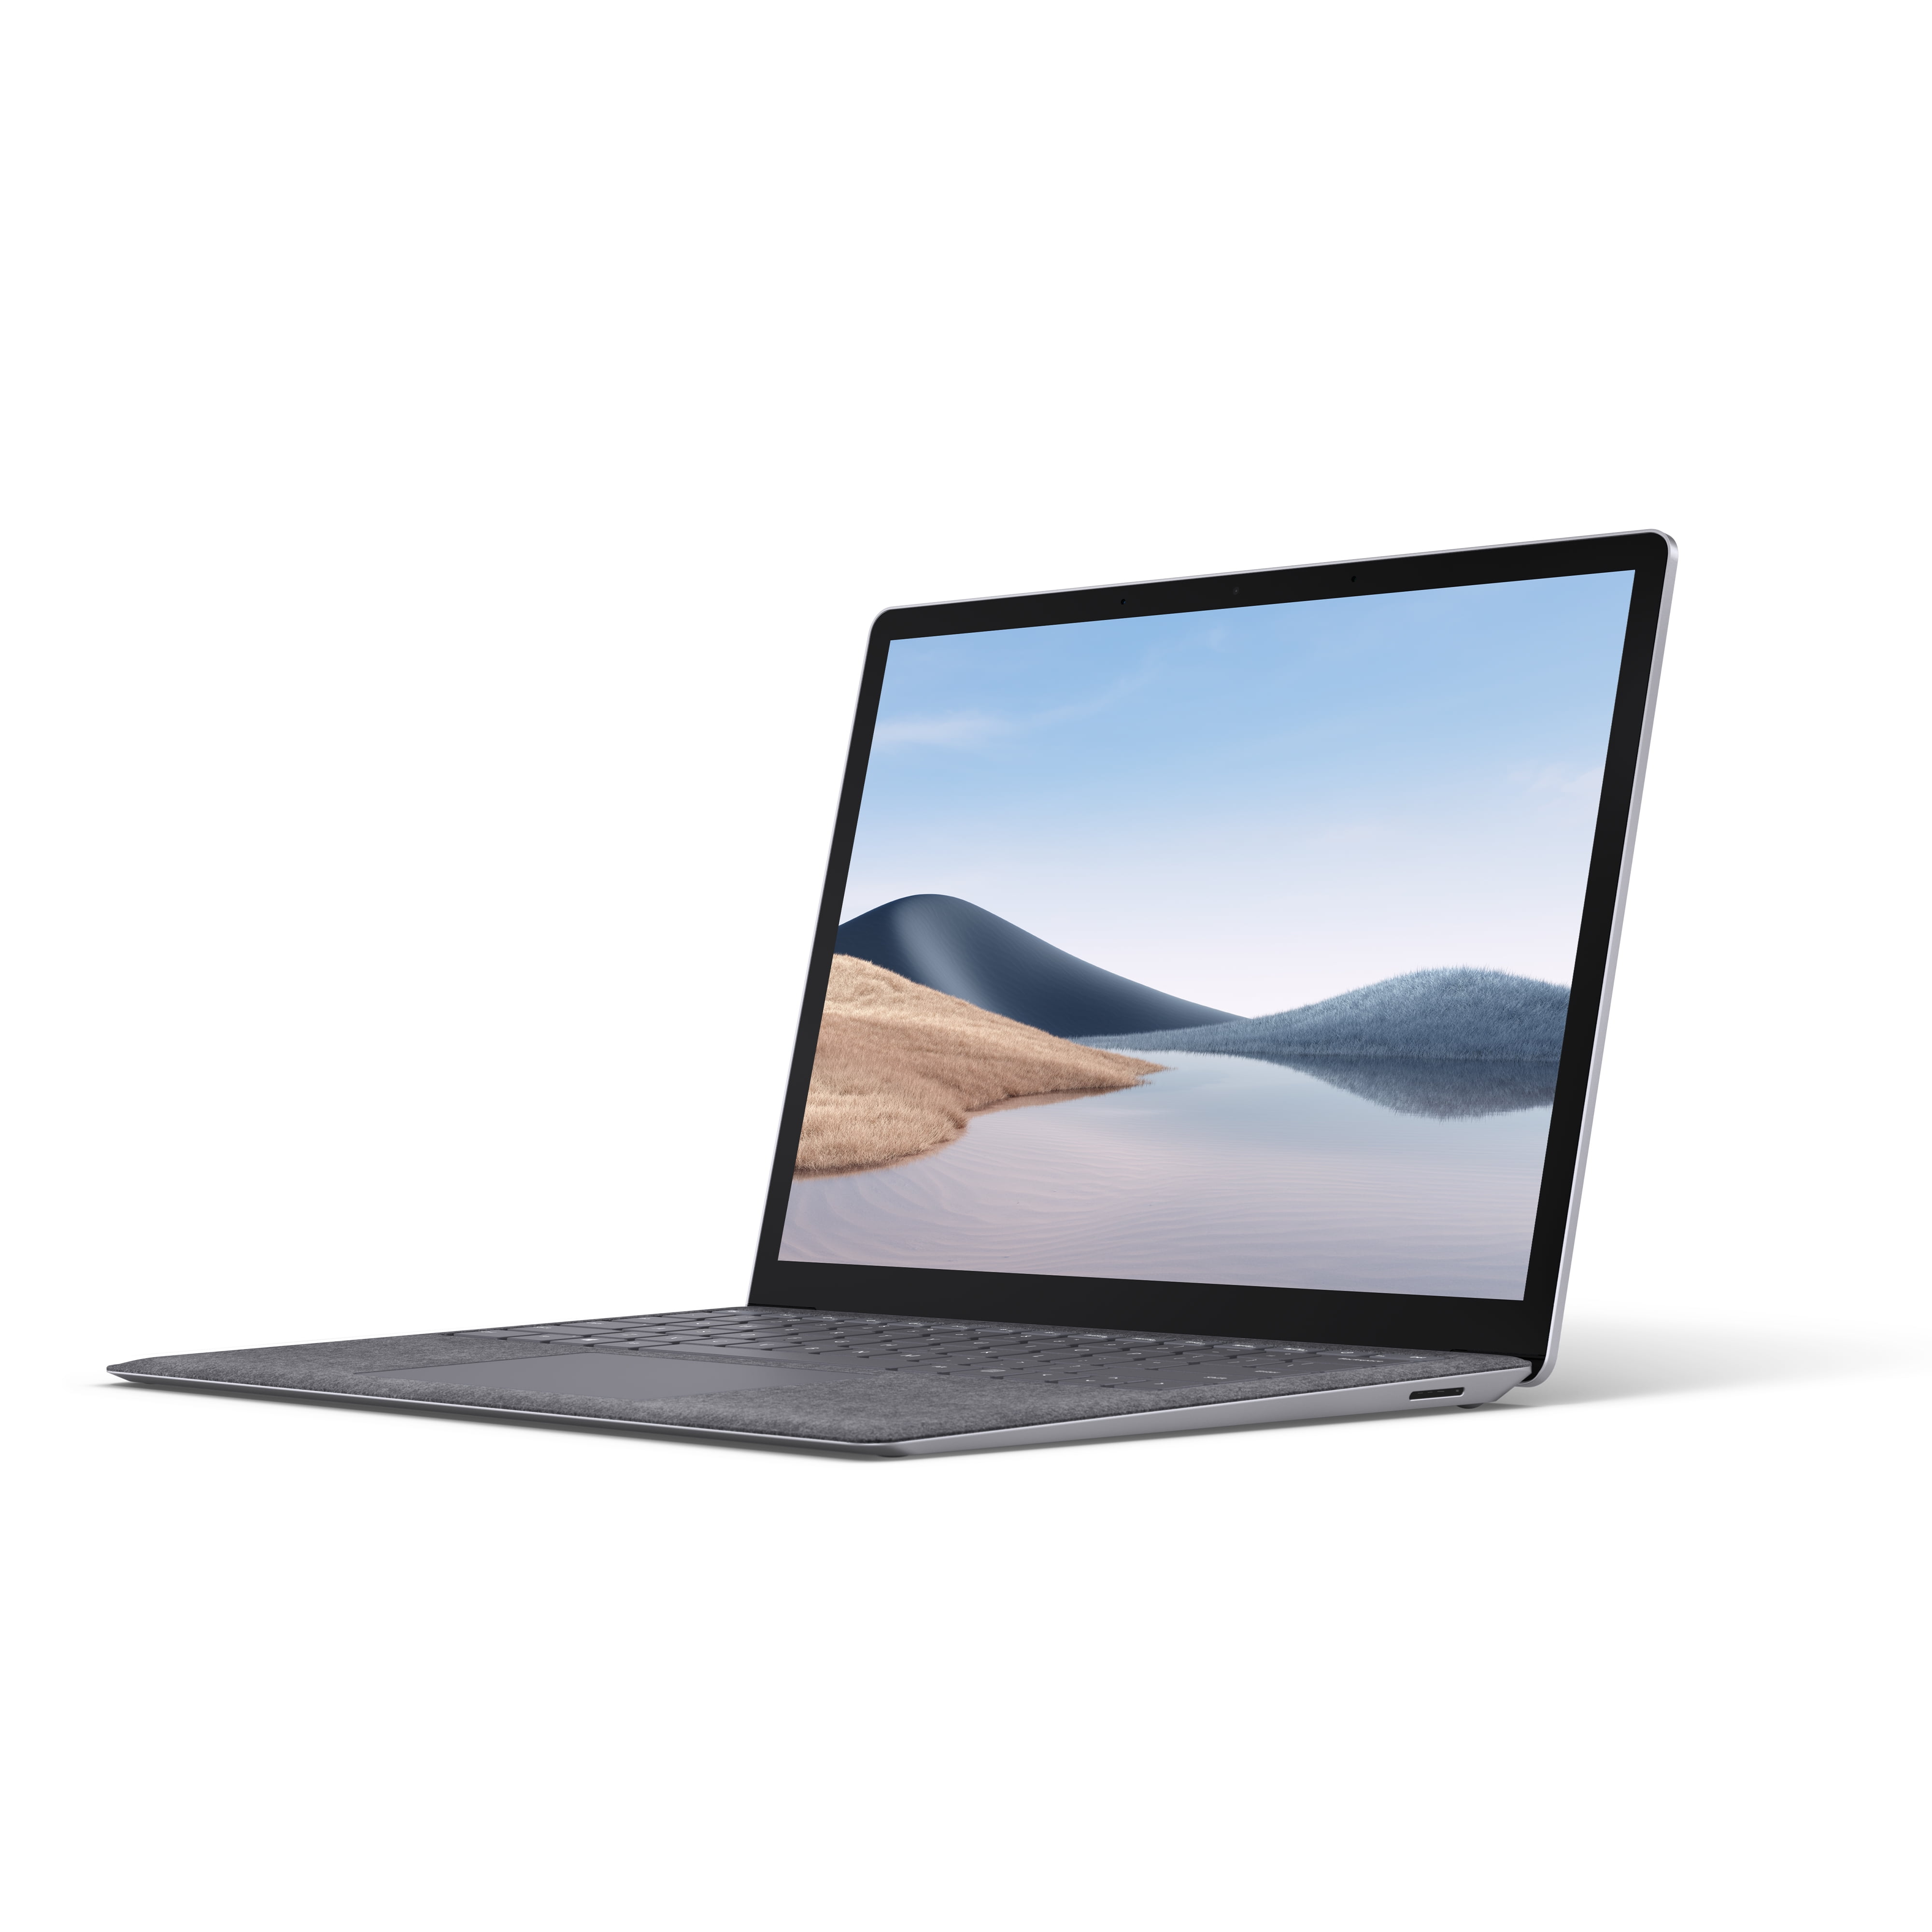 Microsoft - Surface Laptop 4 13.5” Touch-Screen – AMD Ryzen 5 Surface  Edition - 8GB Memory - 256GB Solid State Drive (Latest Model) - Platinum